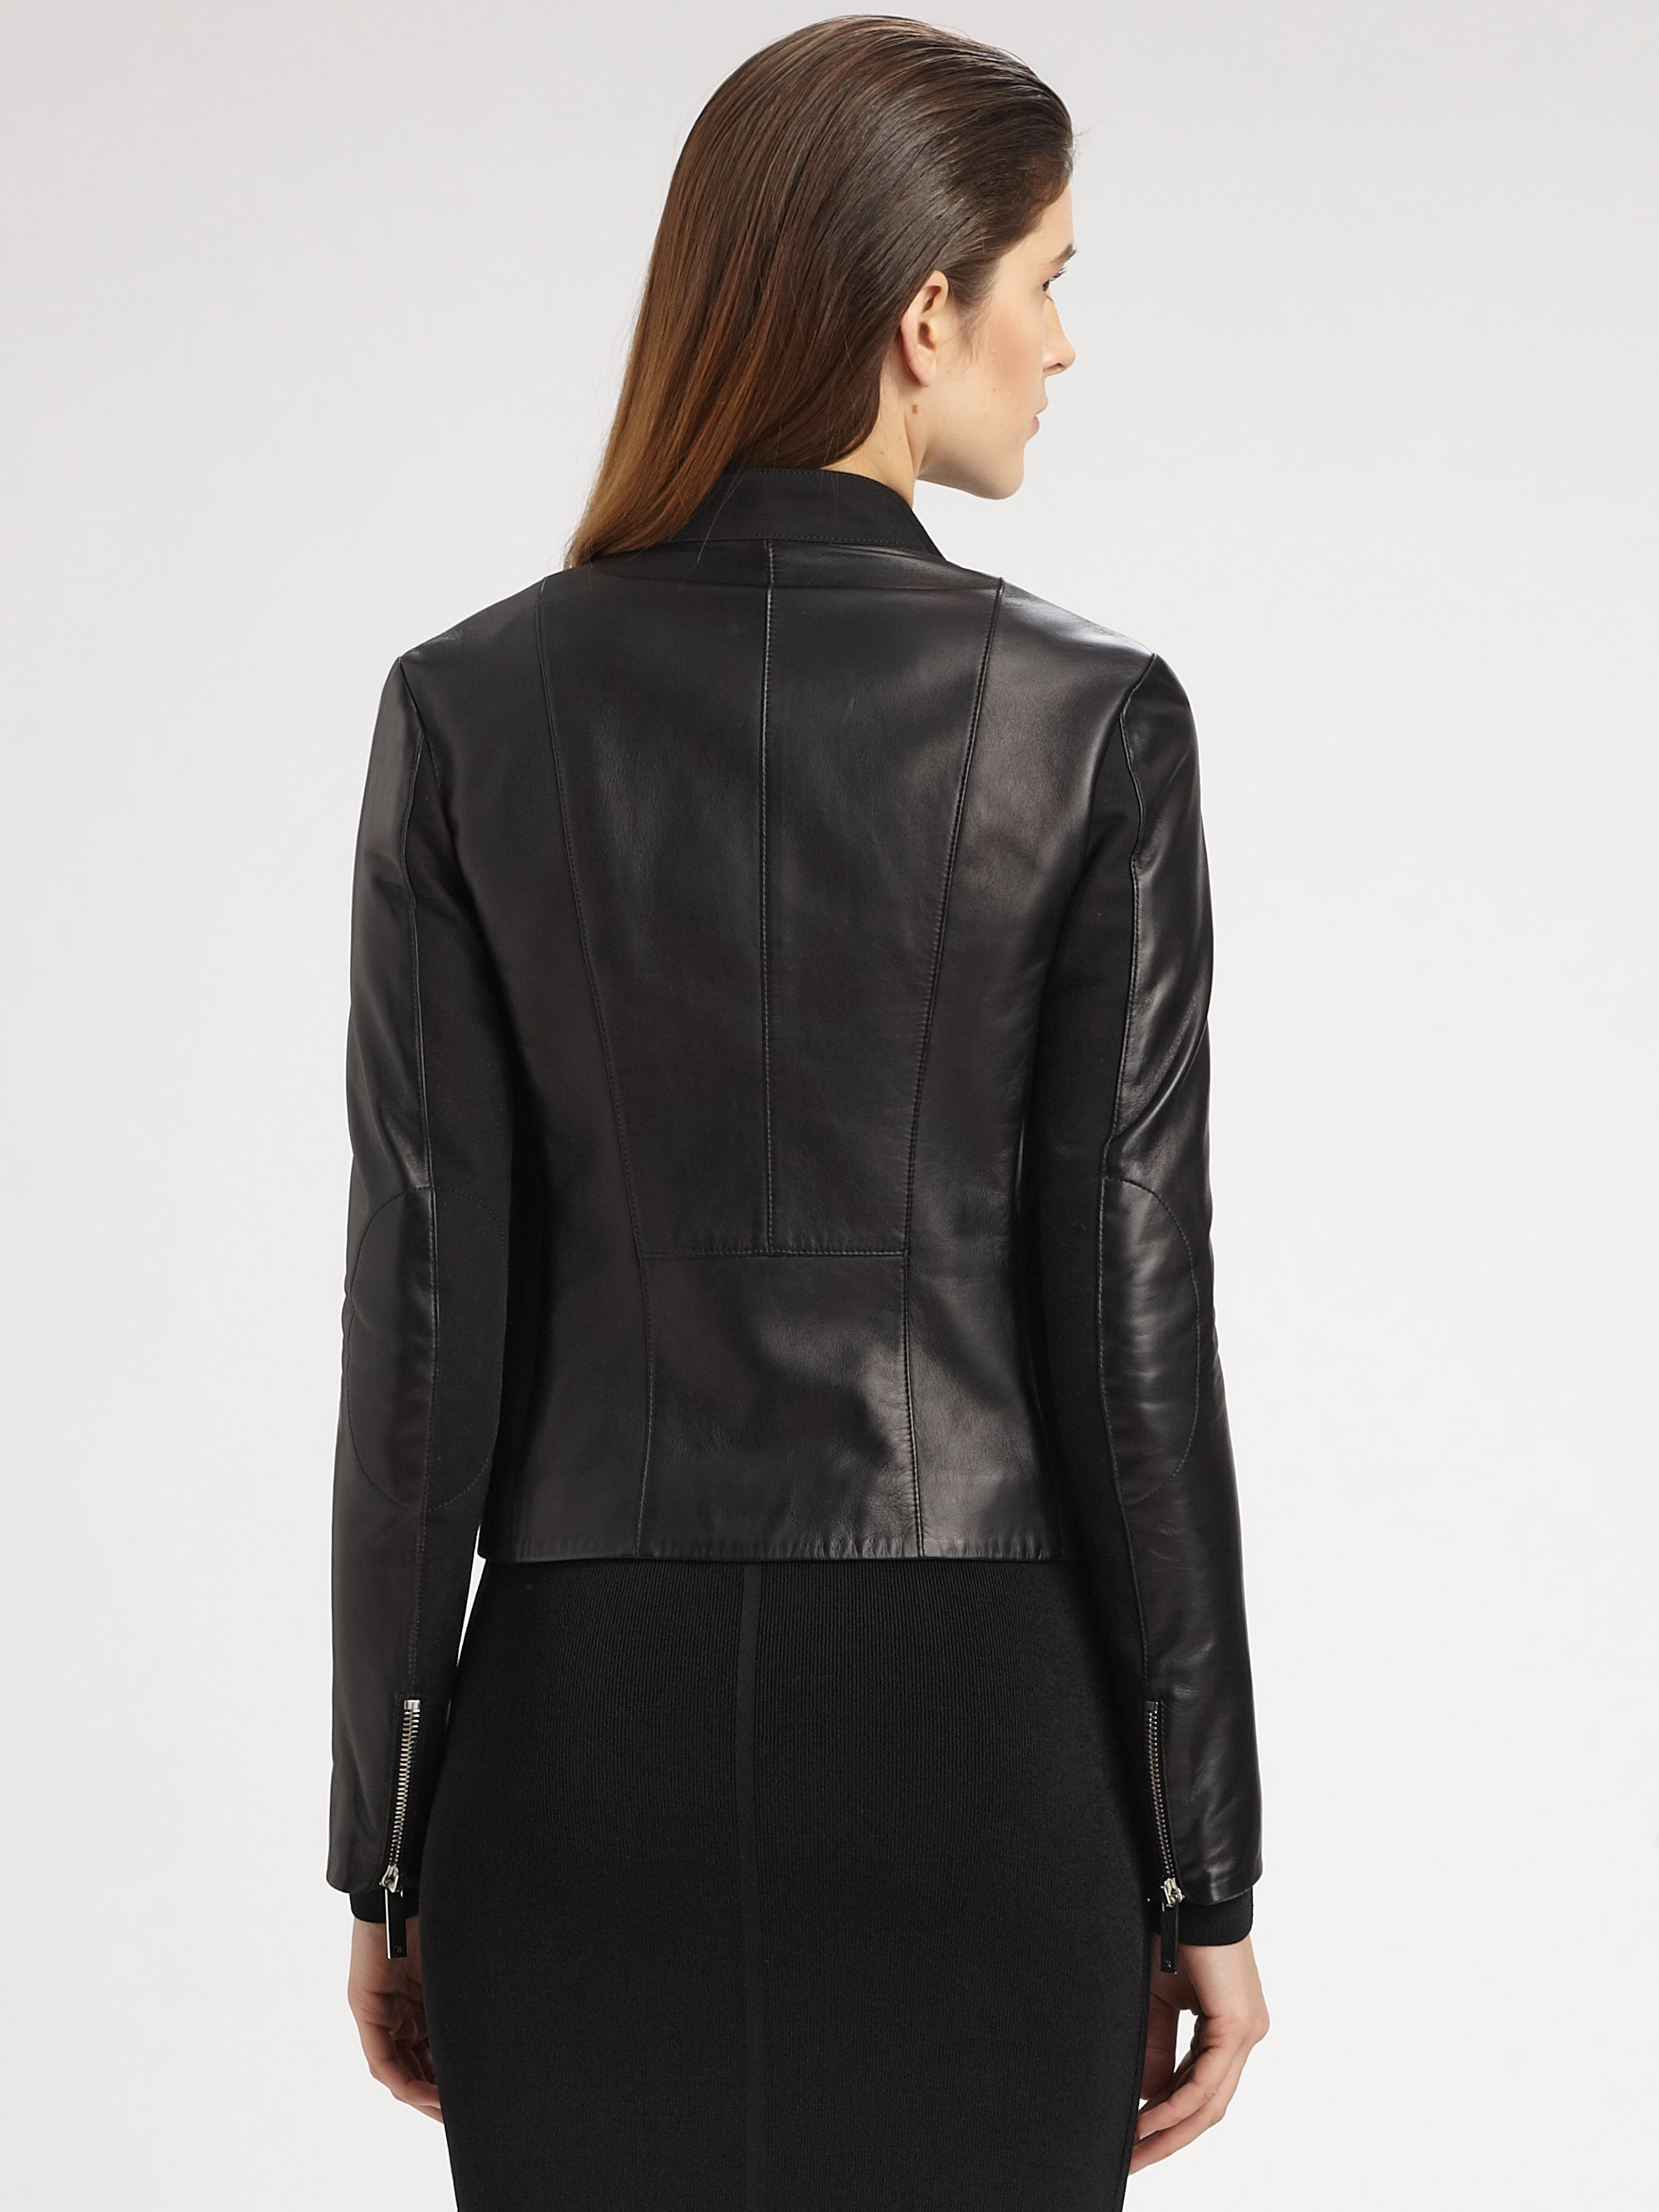 Lyst - The Row Brilly Leather Moto Jacket in Black